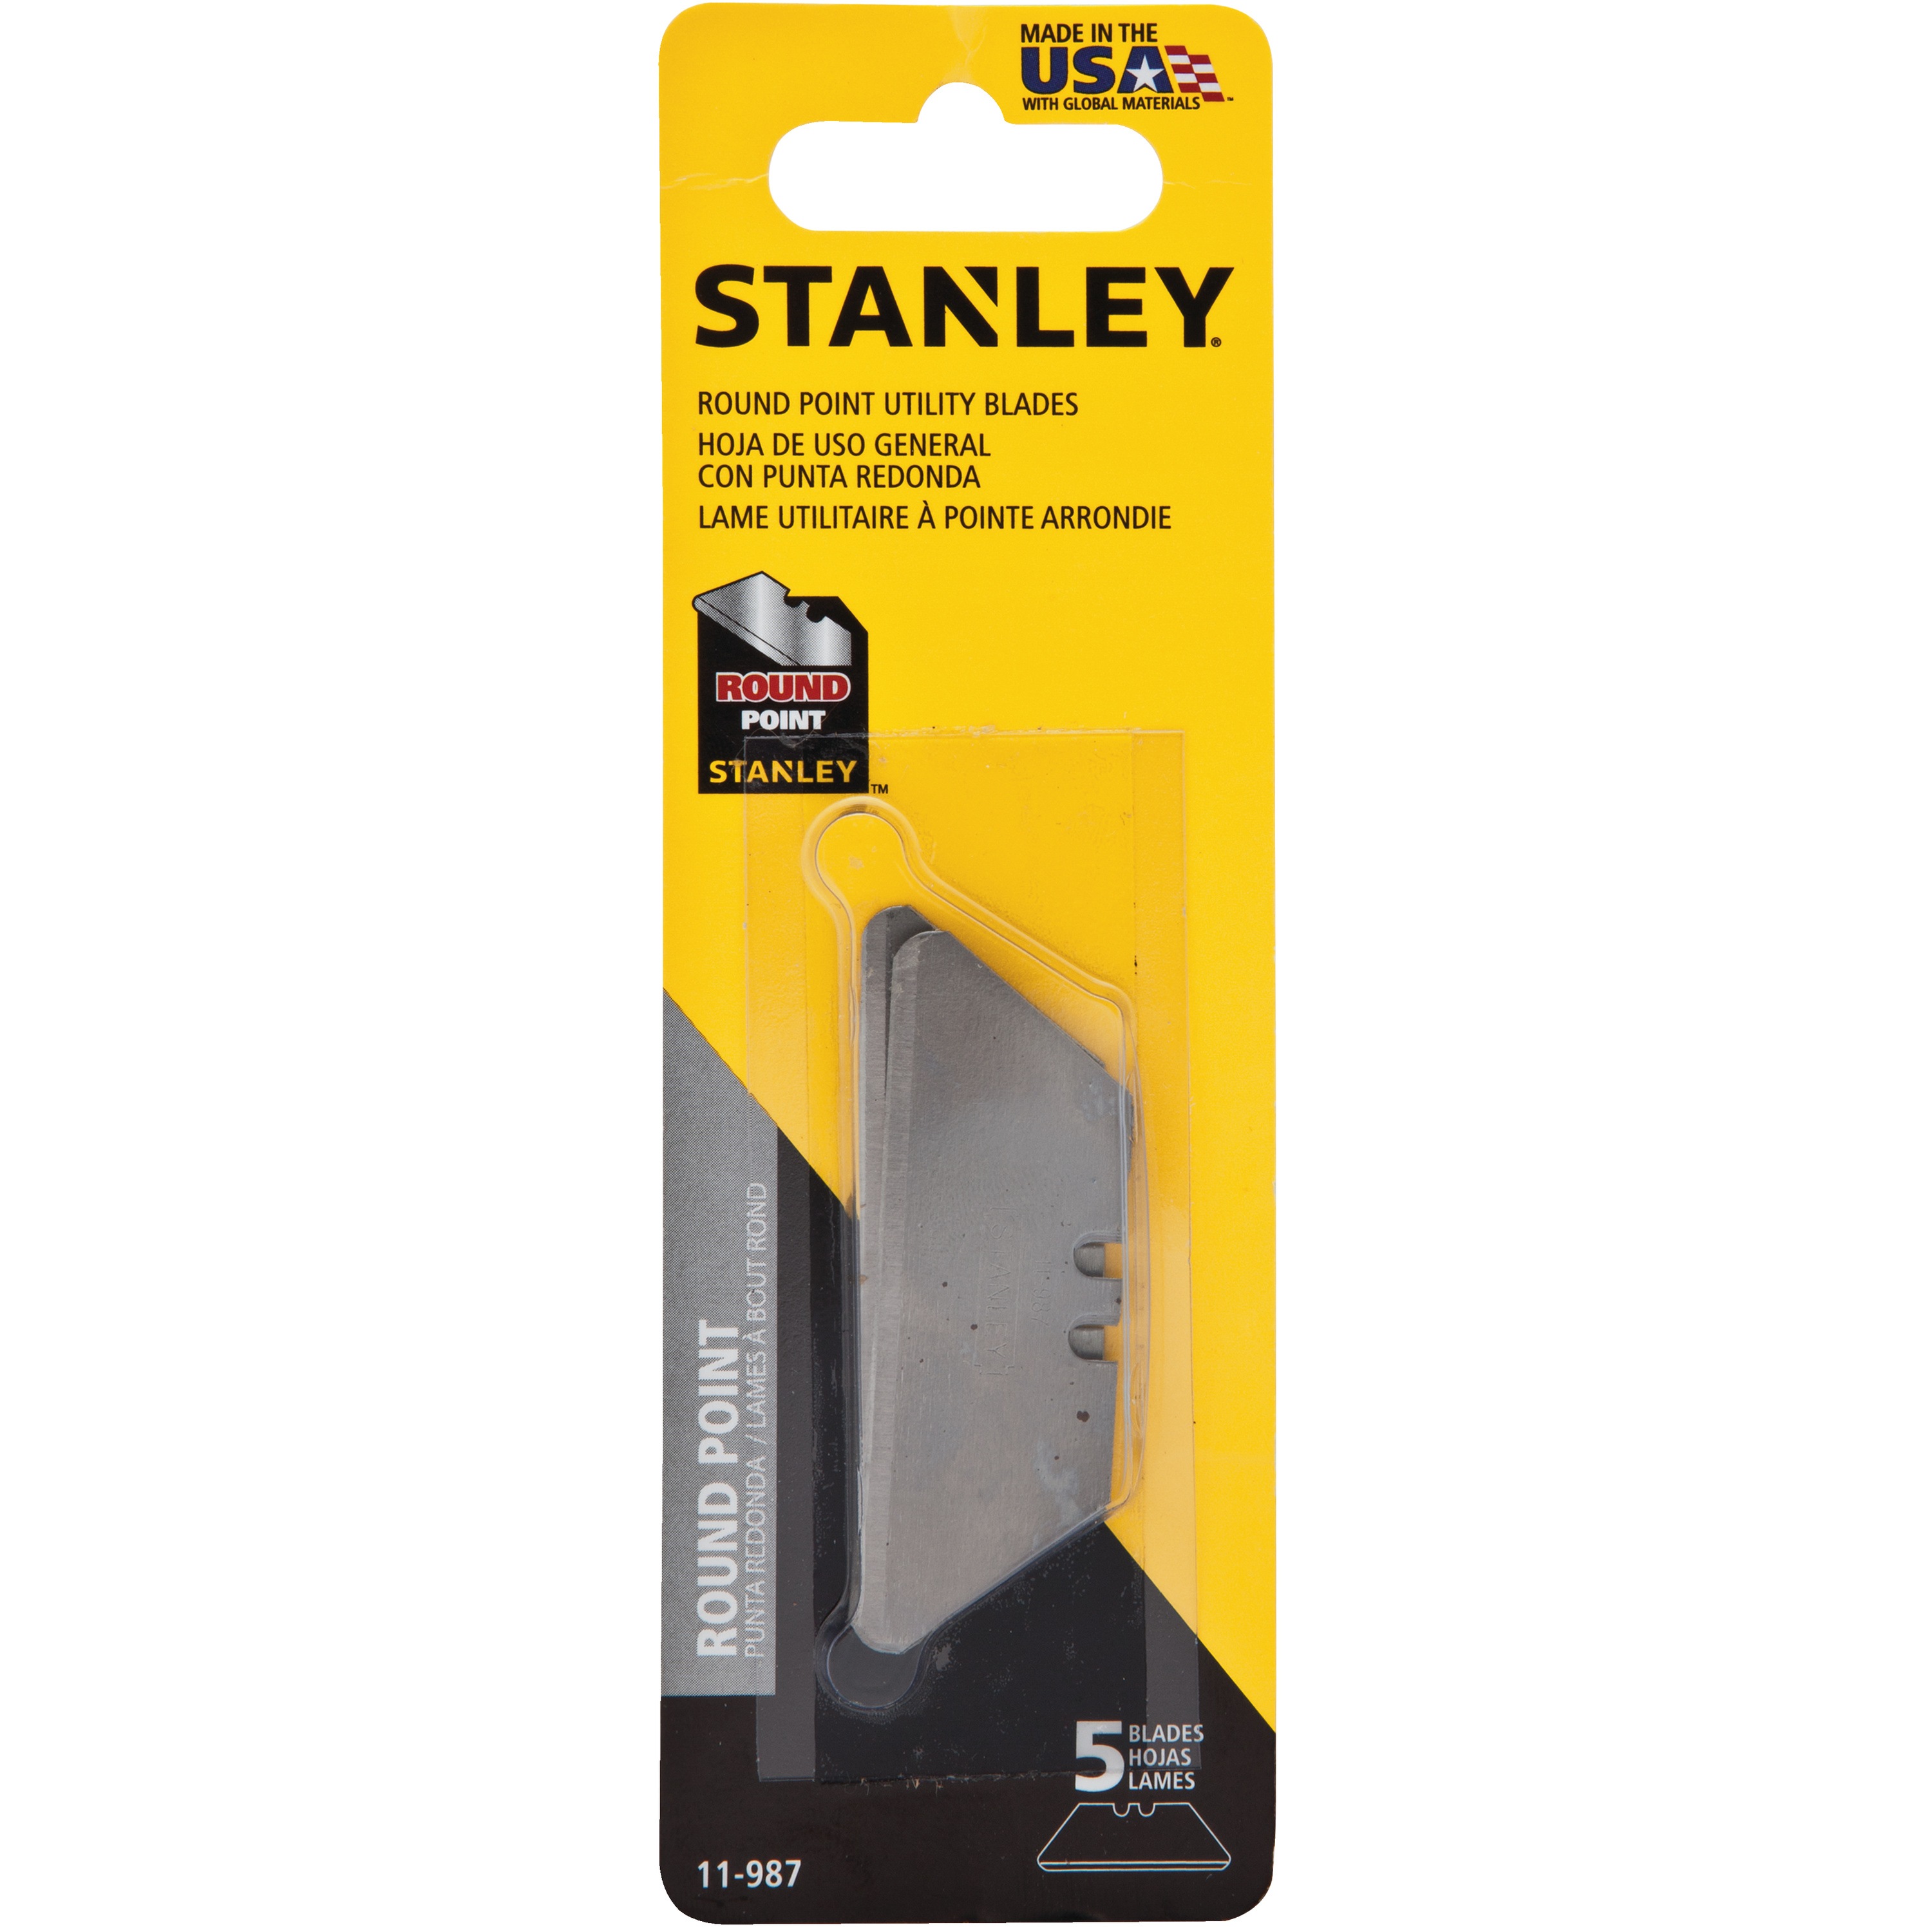 Round-Point Utility Blade - 5 Pack - 11-987 | STANLEY Tools